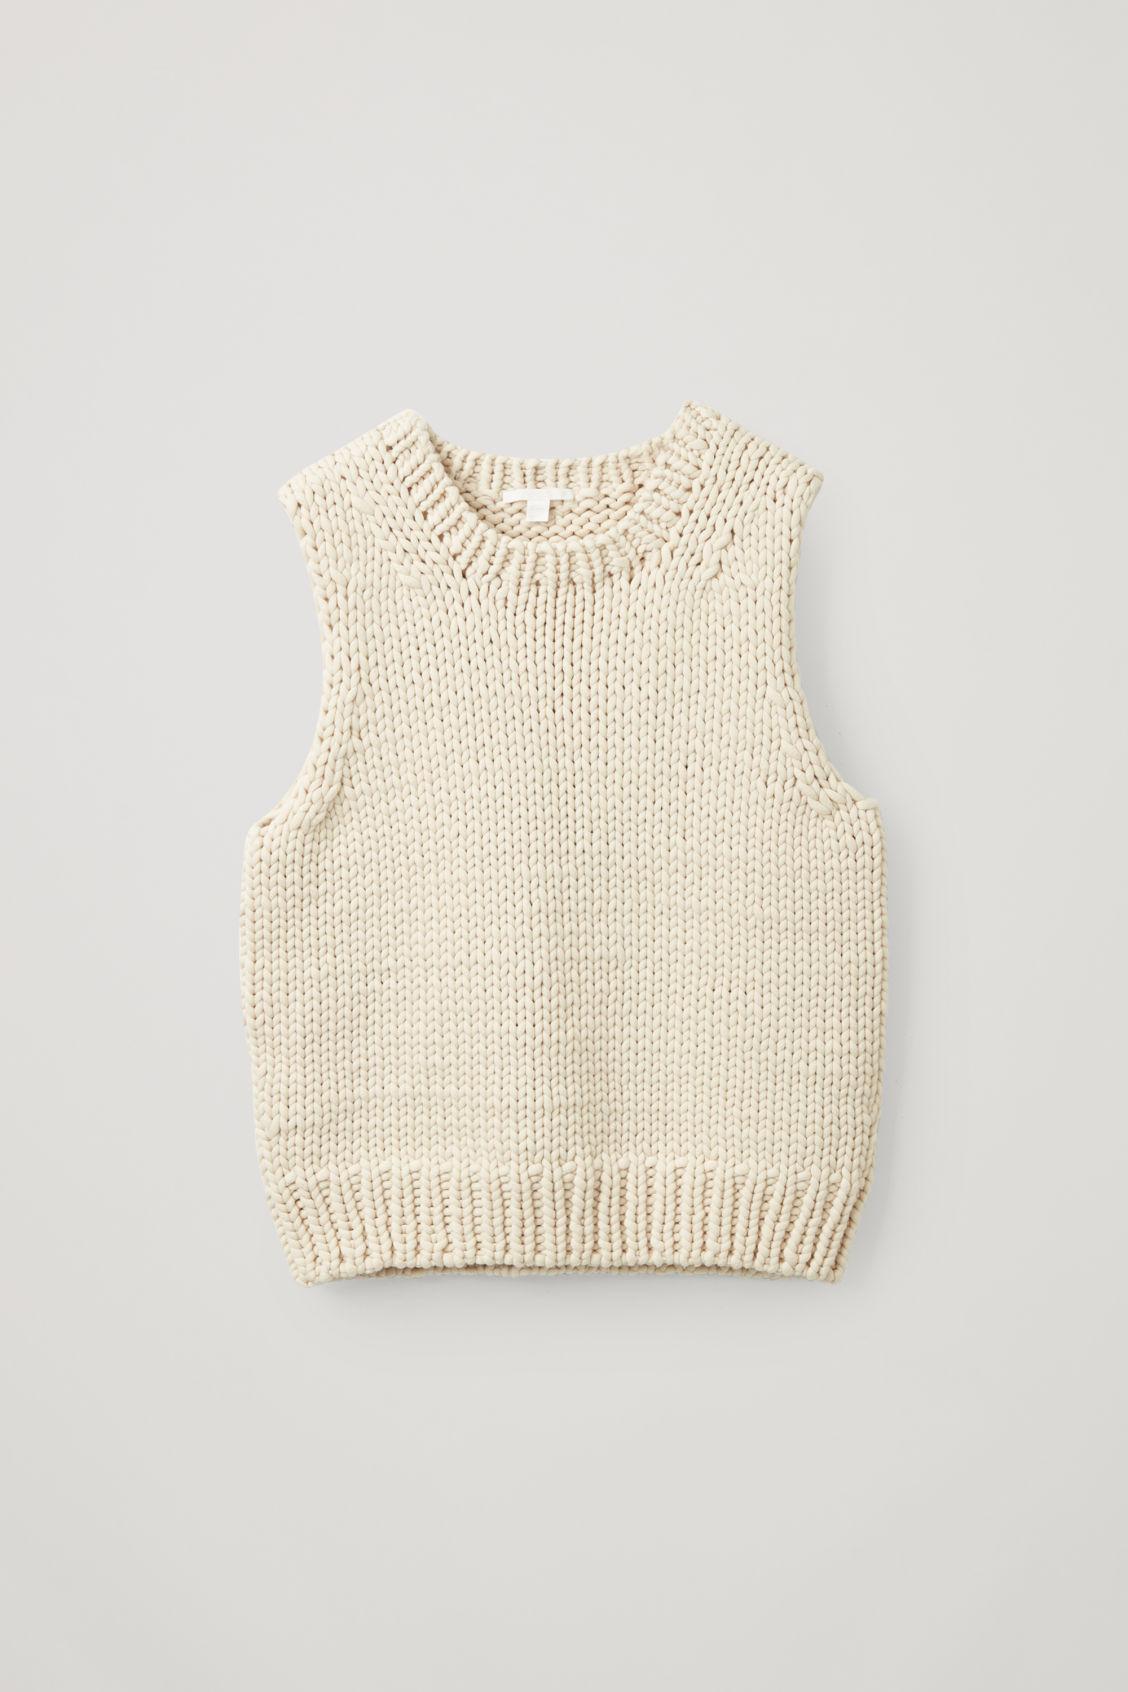 COS Cotton Chunky Knit Vest in Natural | Lyst